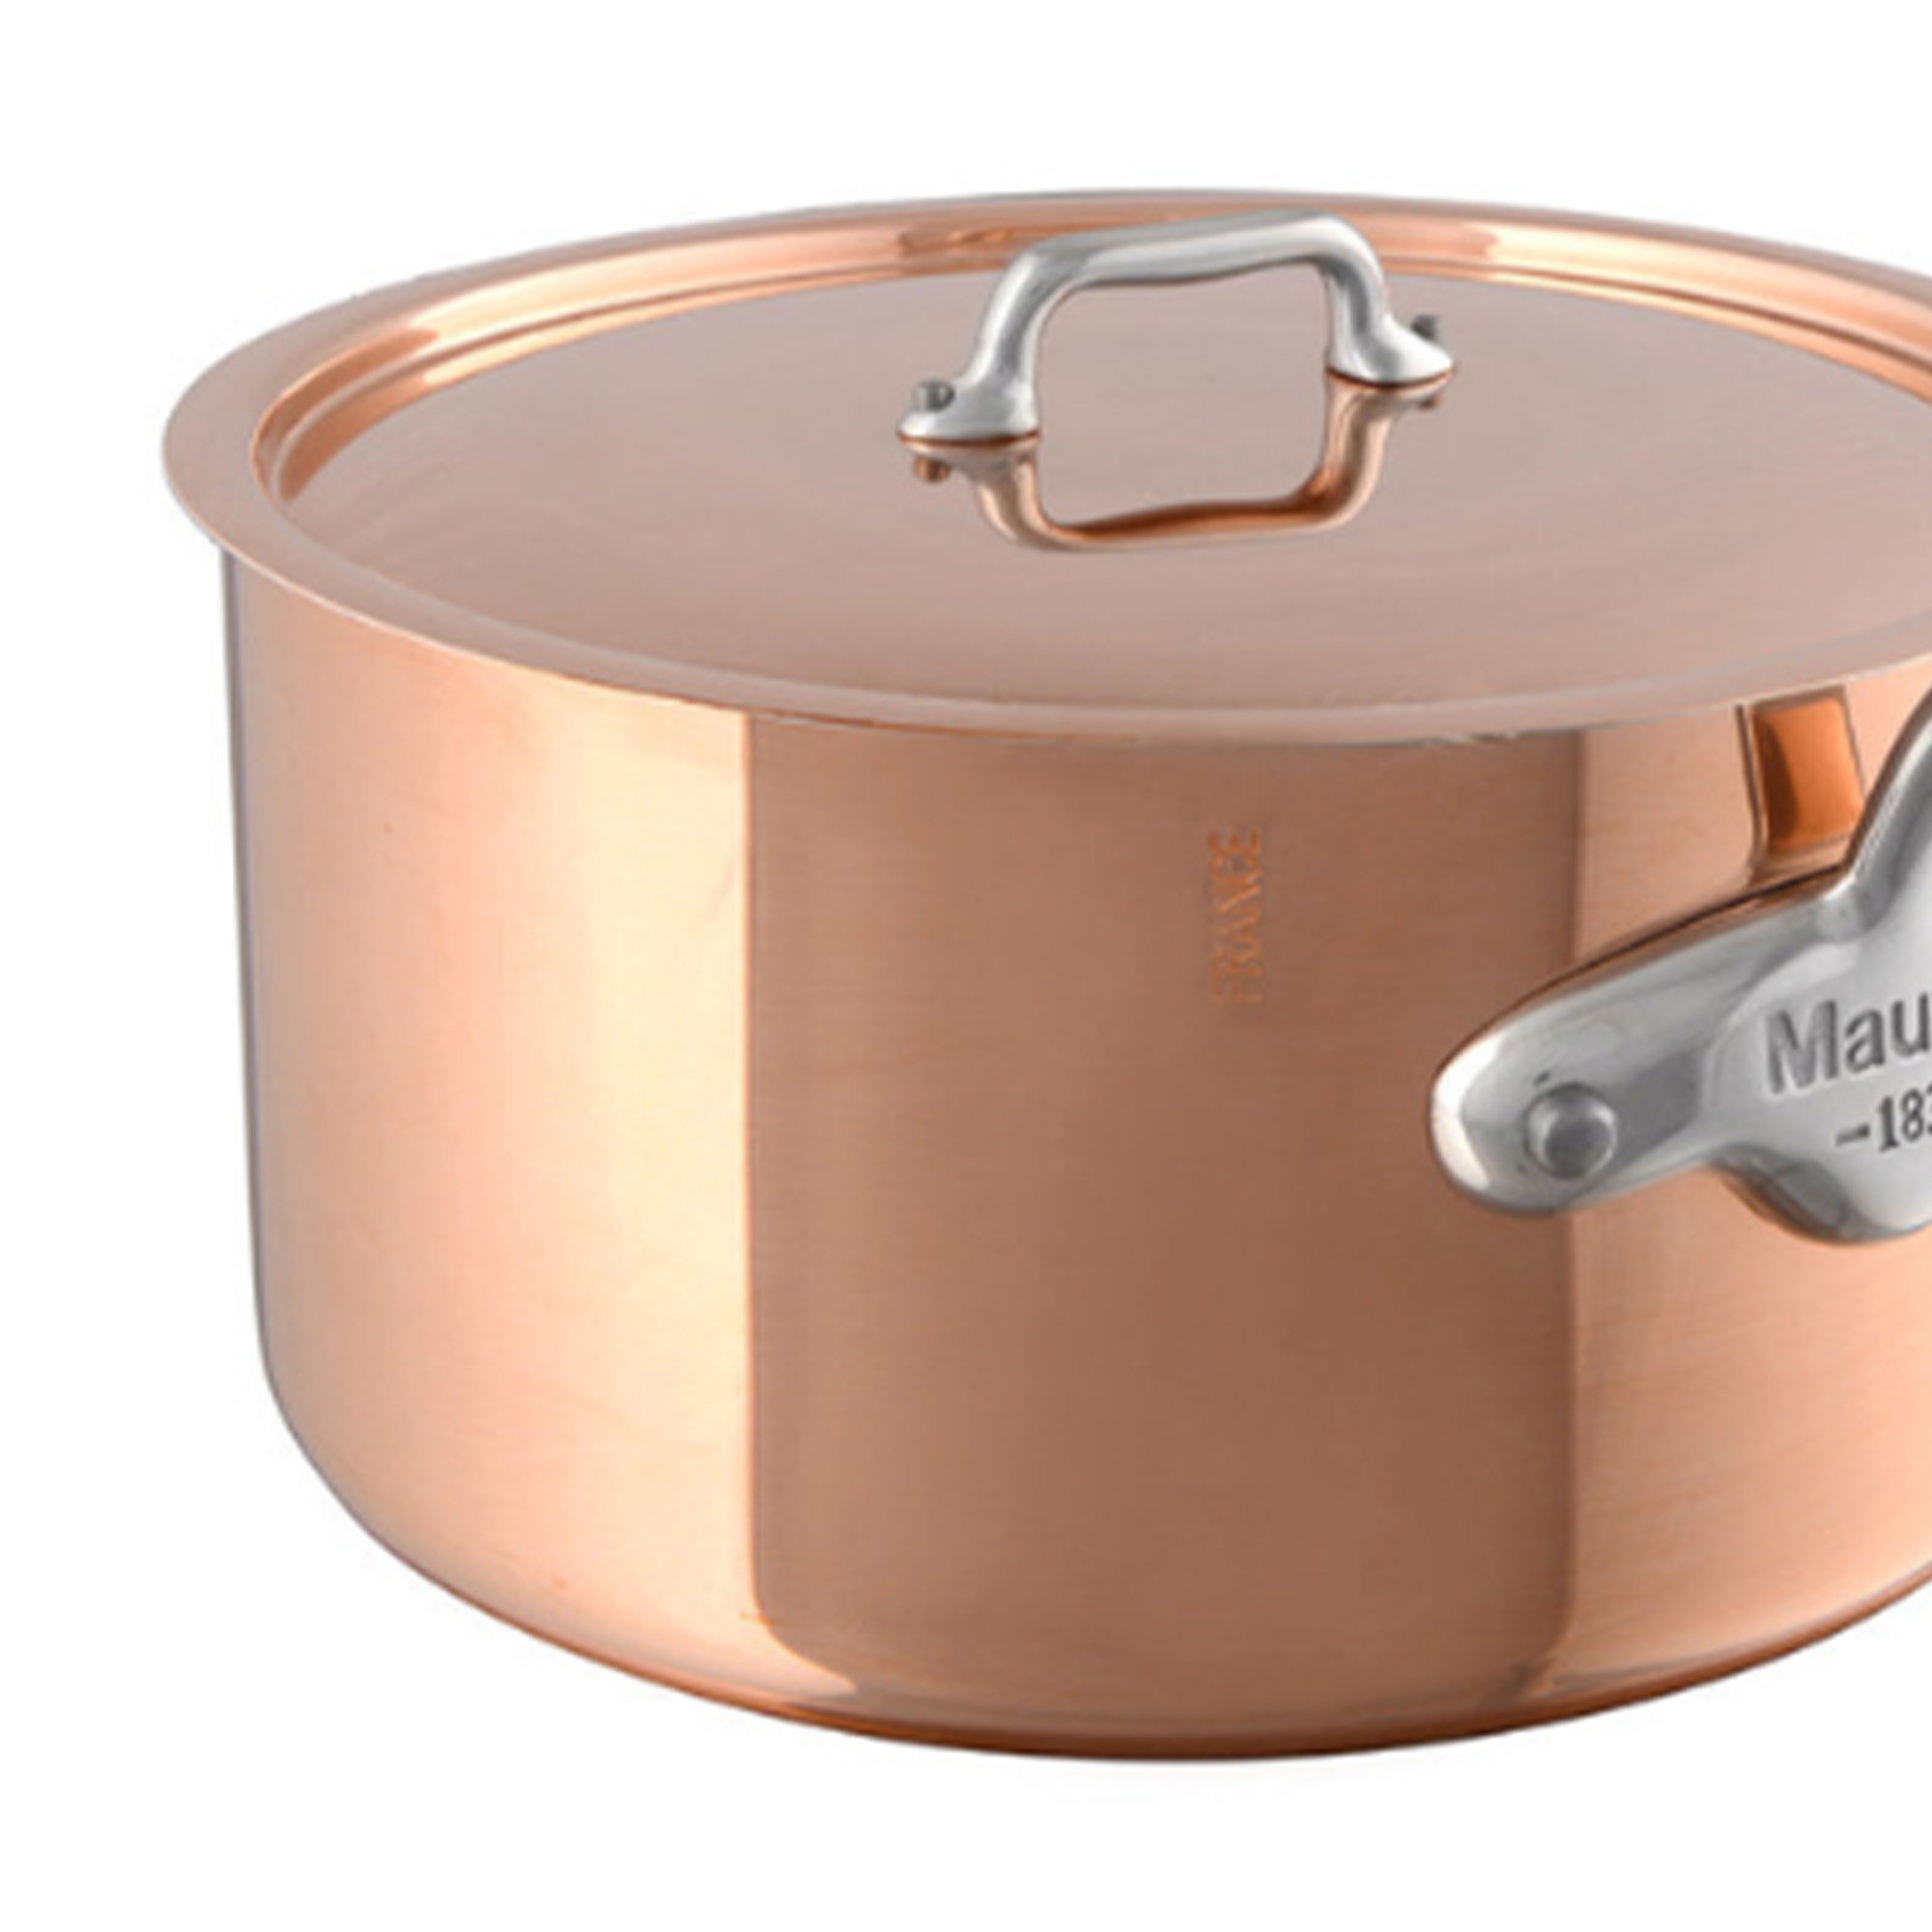 Mauviel M'150 S 1.5mm Polished Copper & Stainless Steel Frying Pan With  Cast Stainless Steel Handle, 10.2-in, Made In France